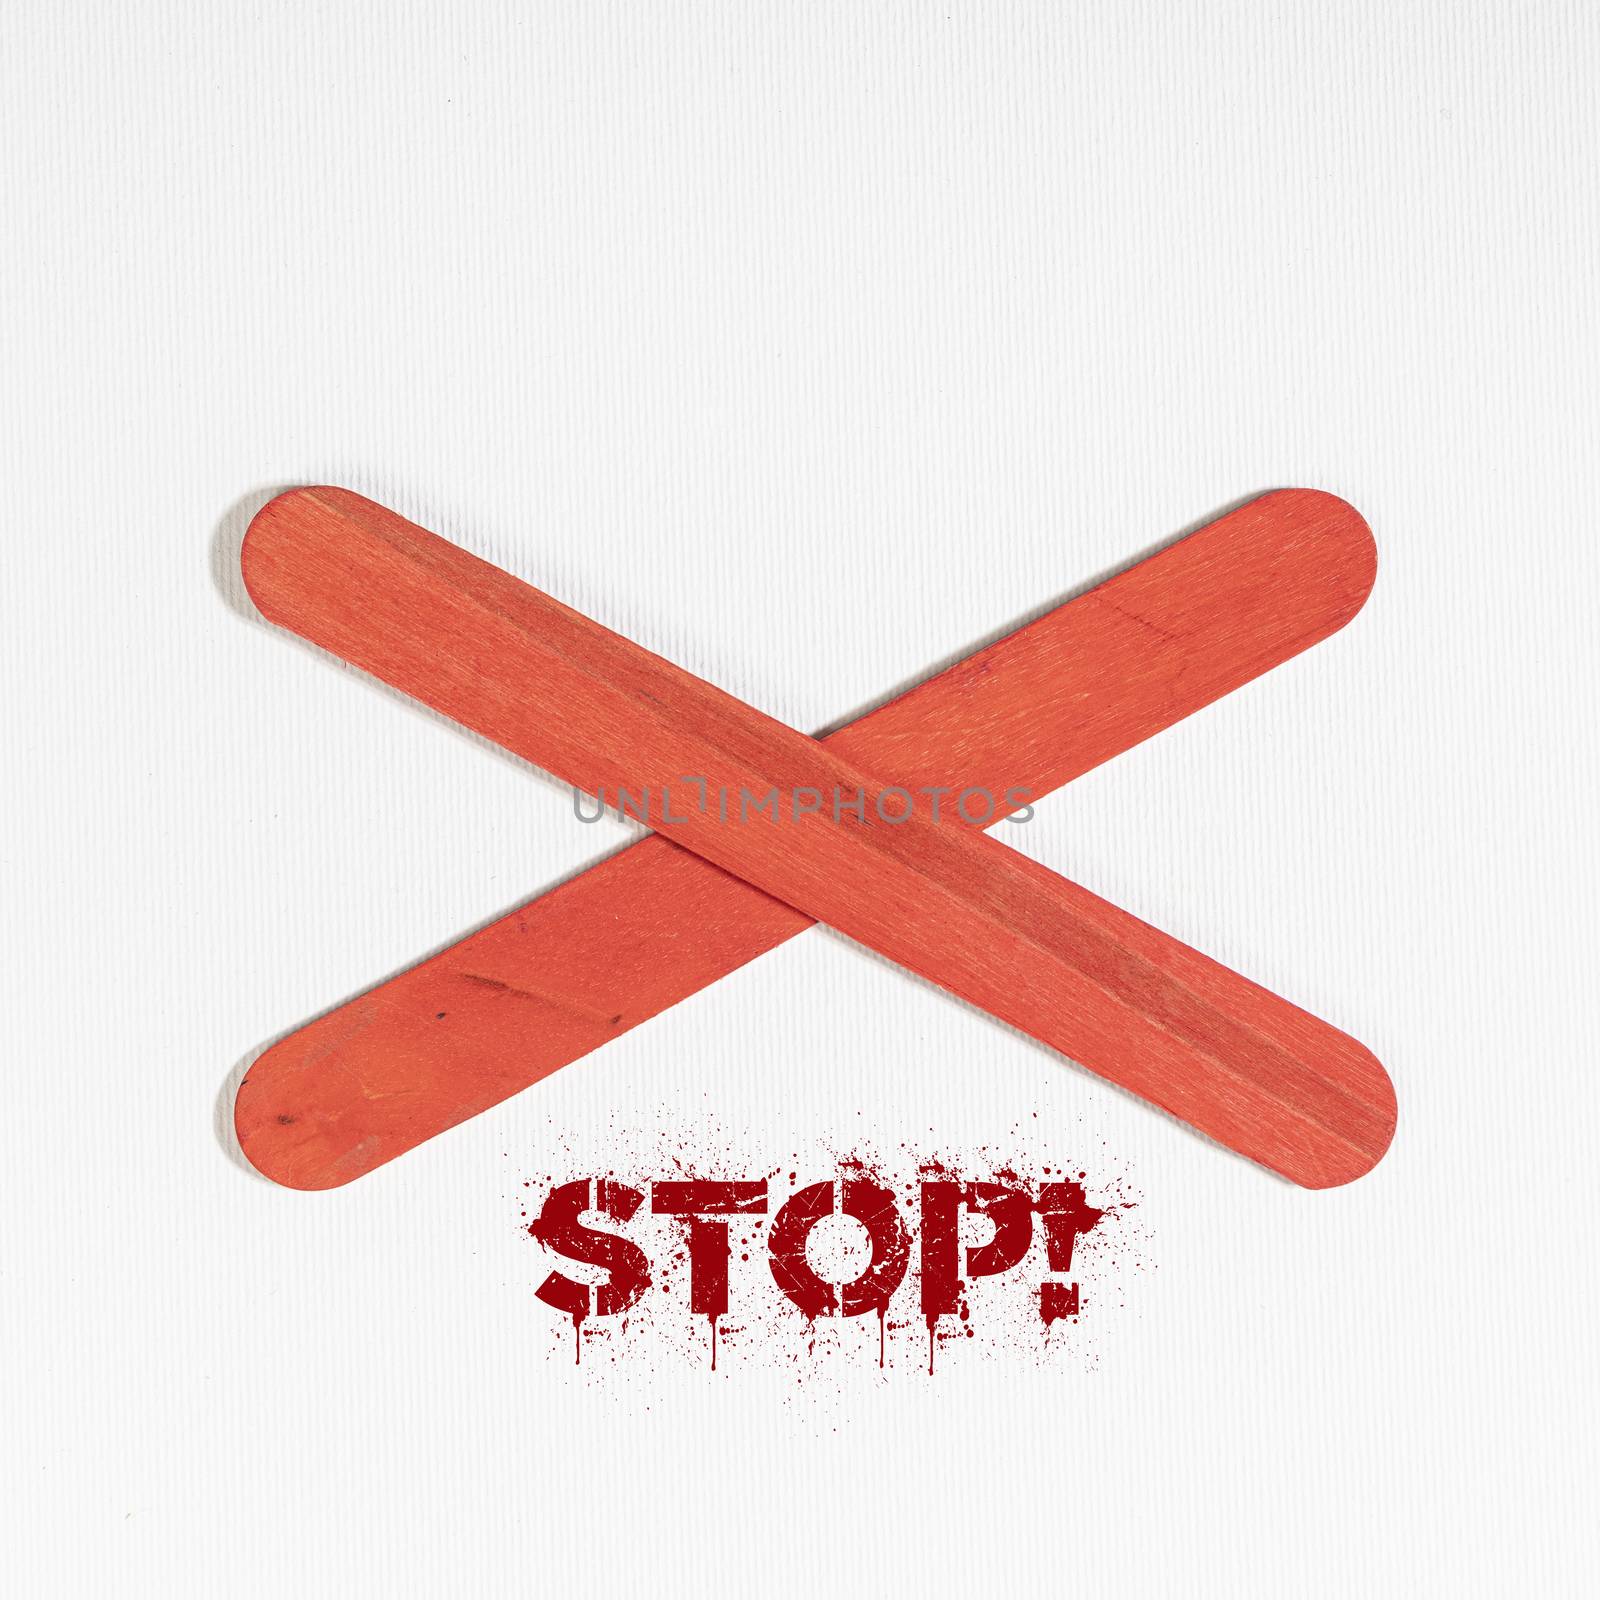 the word Stop under an X of red wood on a white surface